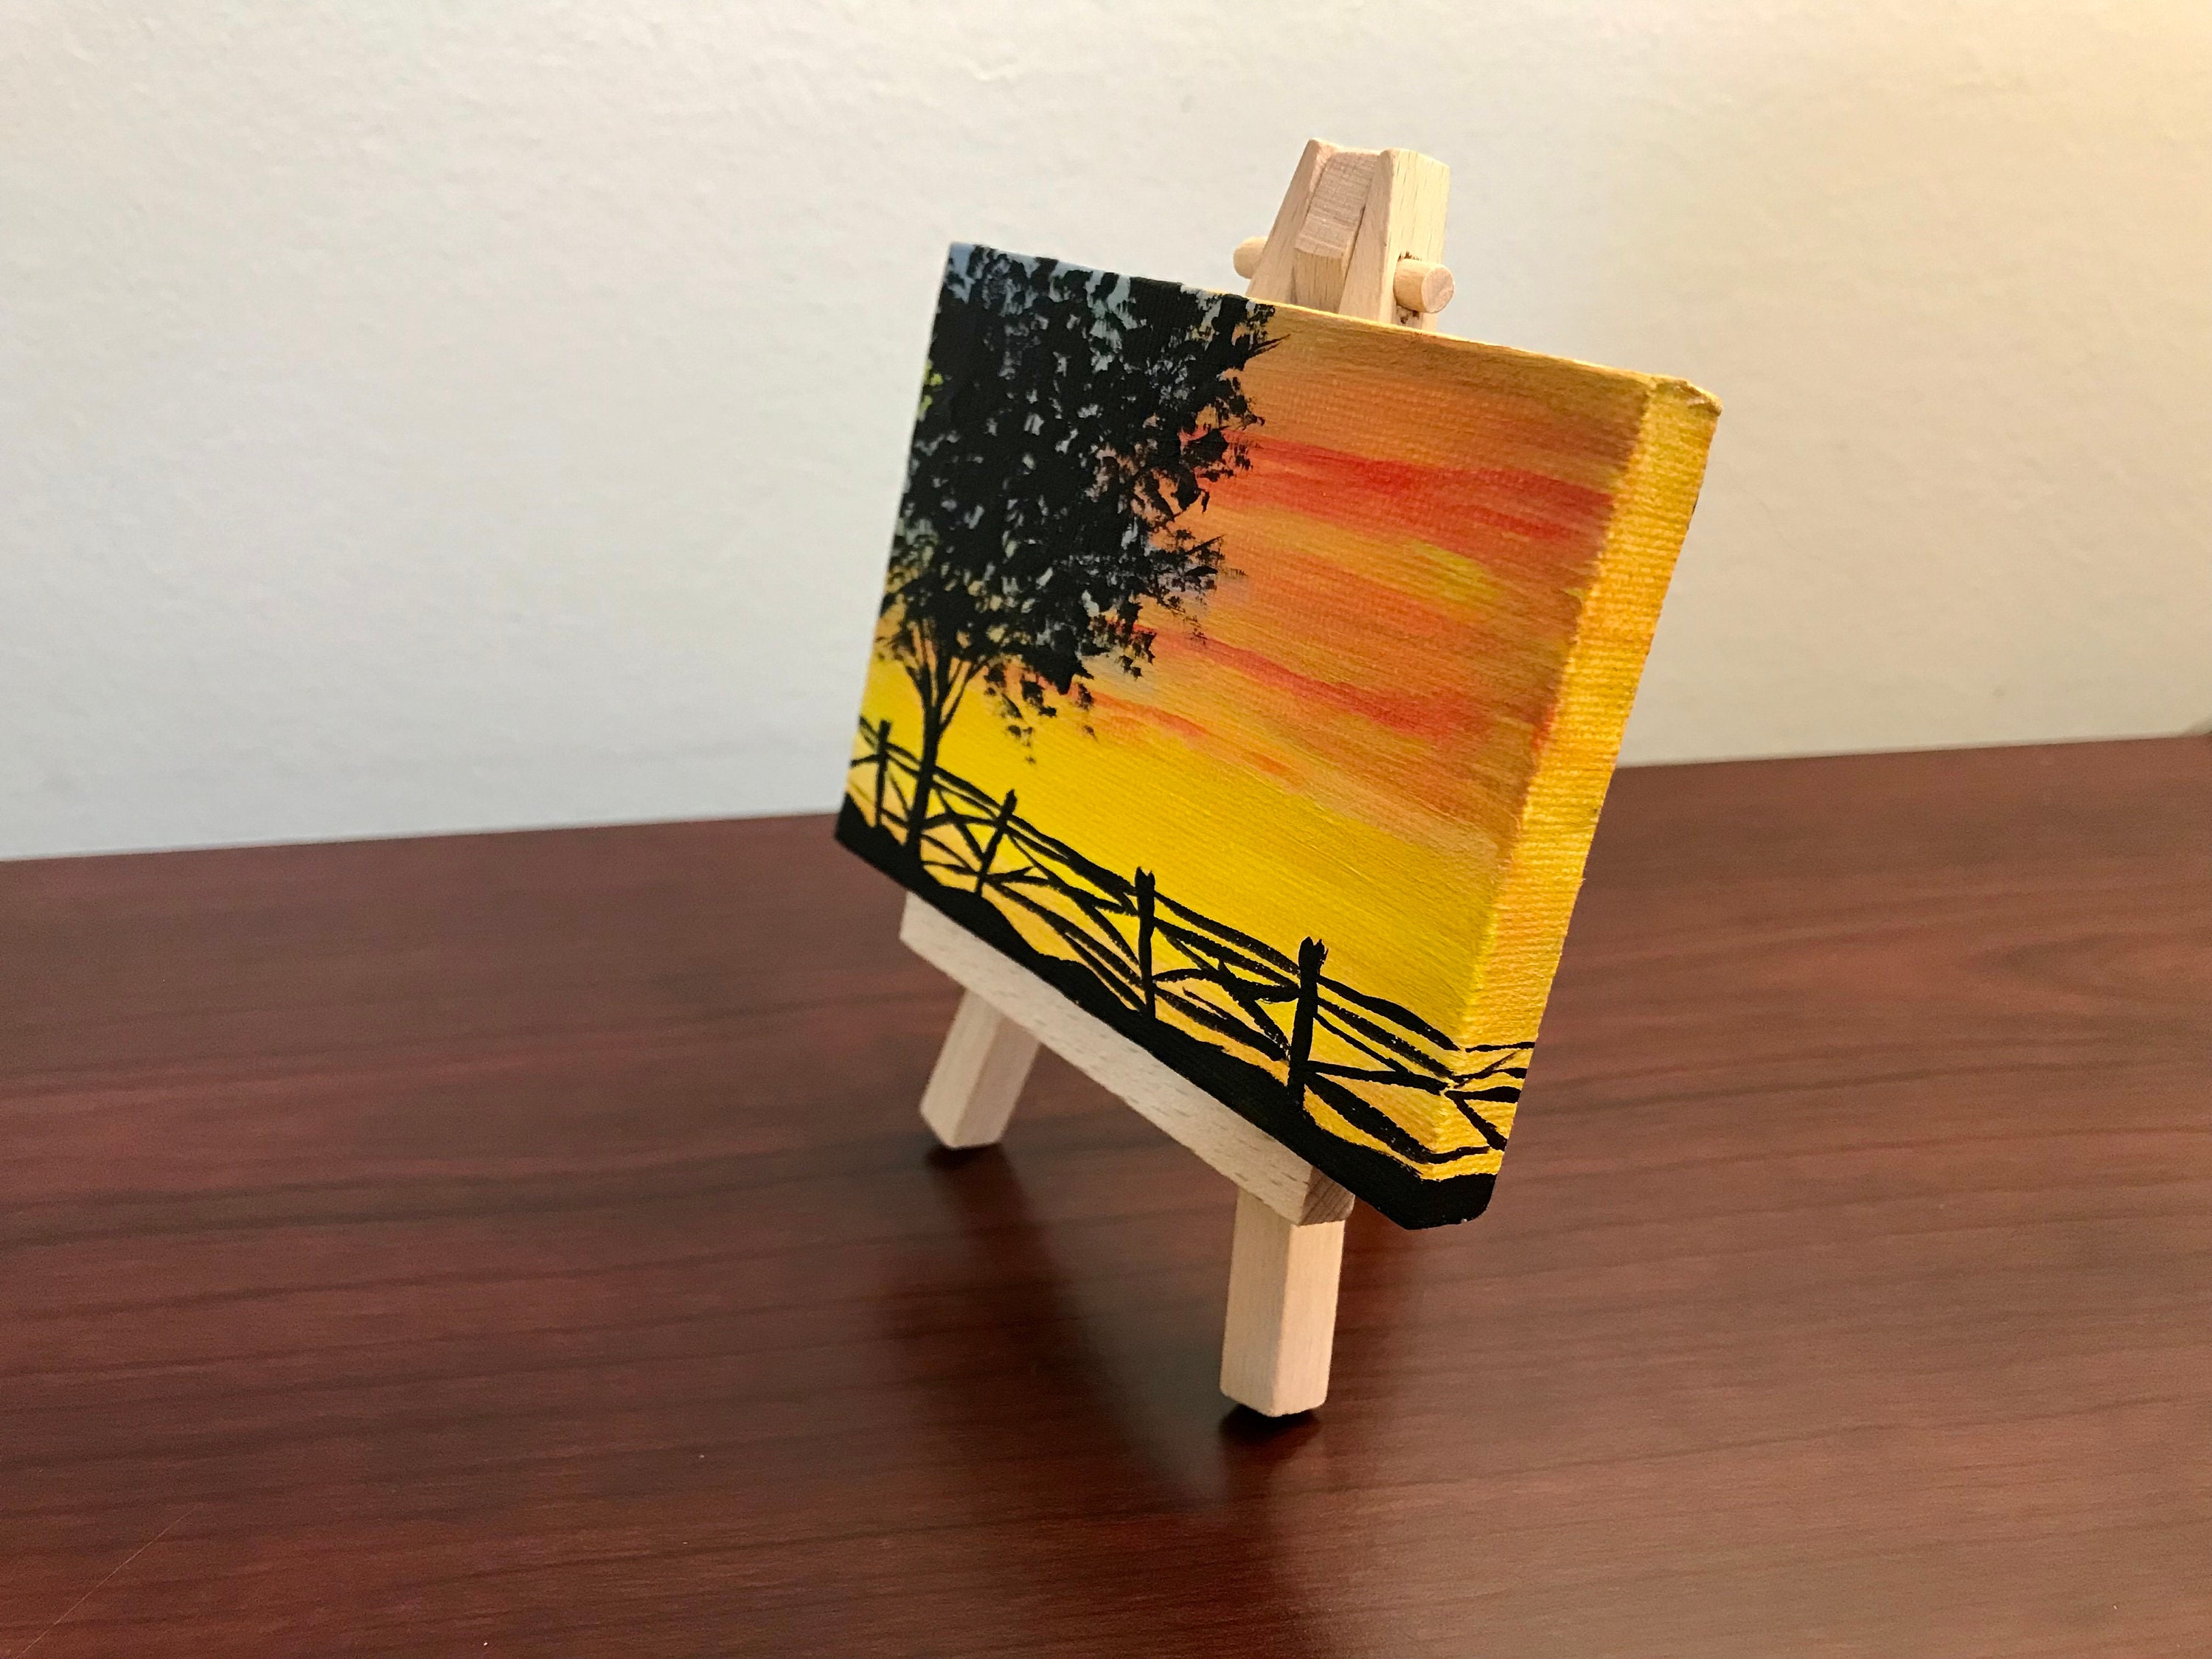 Miniature Painting, Mini Canvas, Sunset, Set of 2 Paintings, Landscape,  3X4, Decor, Canvas Art, Painting With Easel 